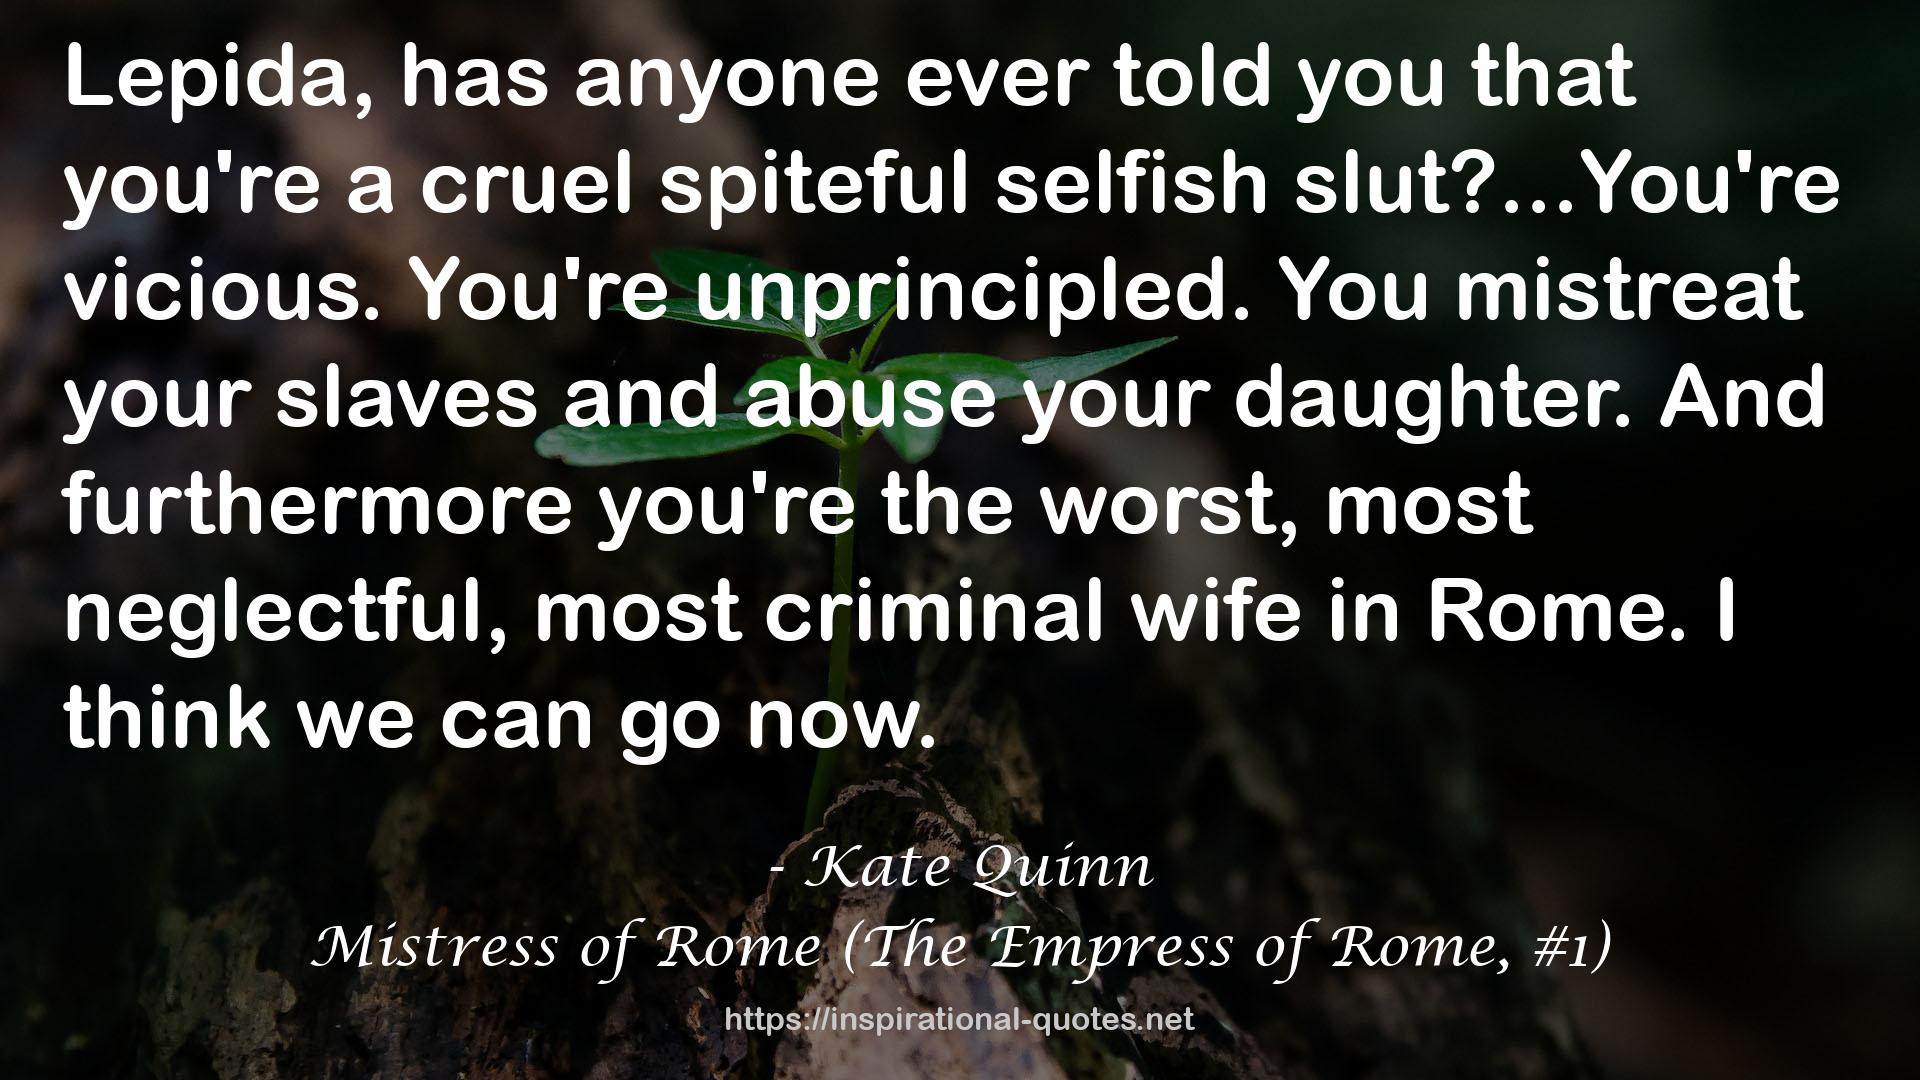 Mistress of Rome (The Empress of Rome, #1) QUOTES